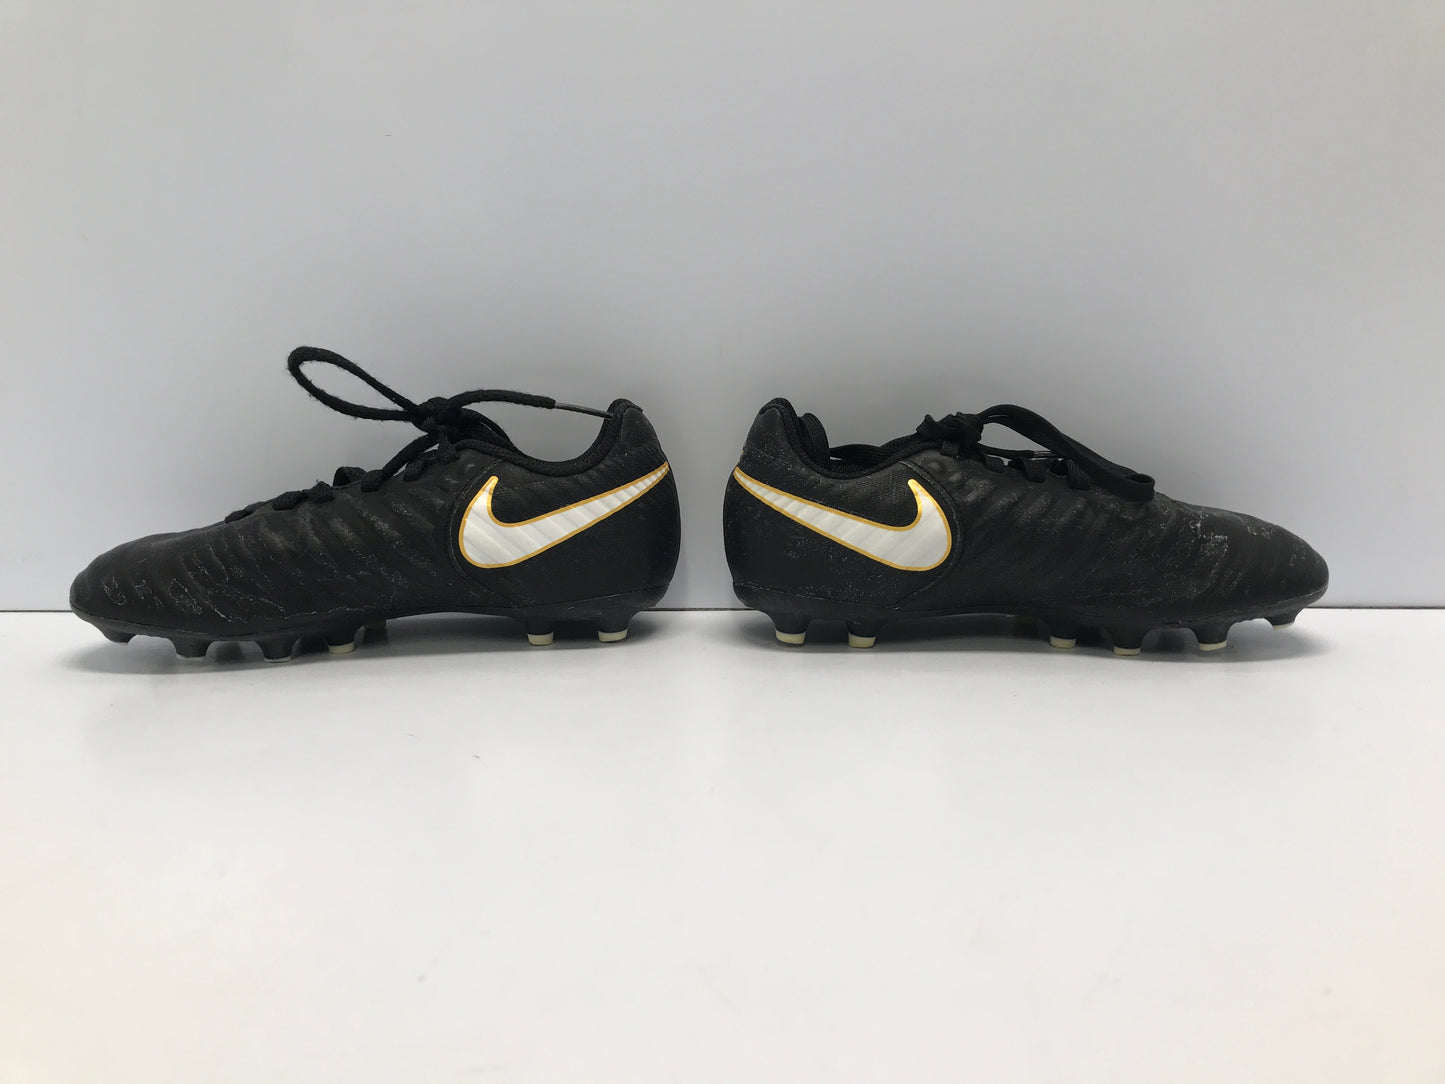 Soccer Shoes Cleats Child Size 12.5 Nike Black Gold